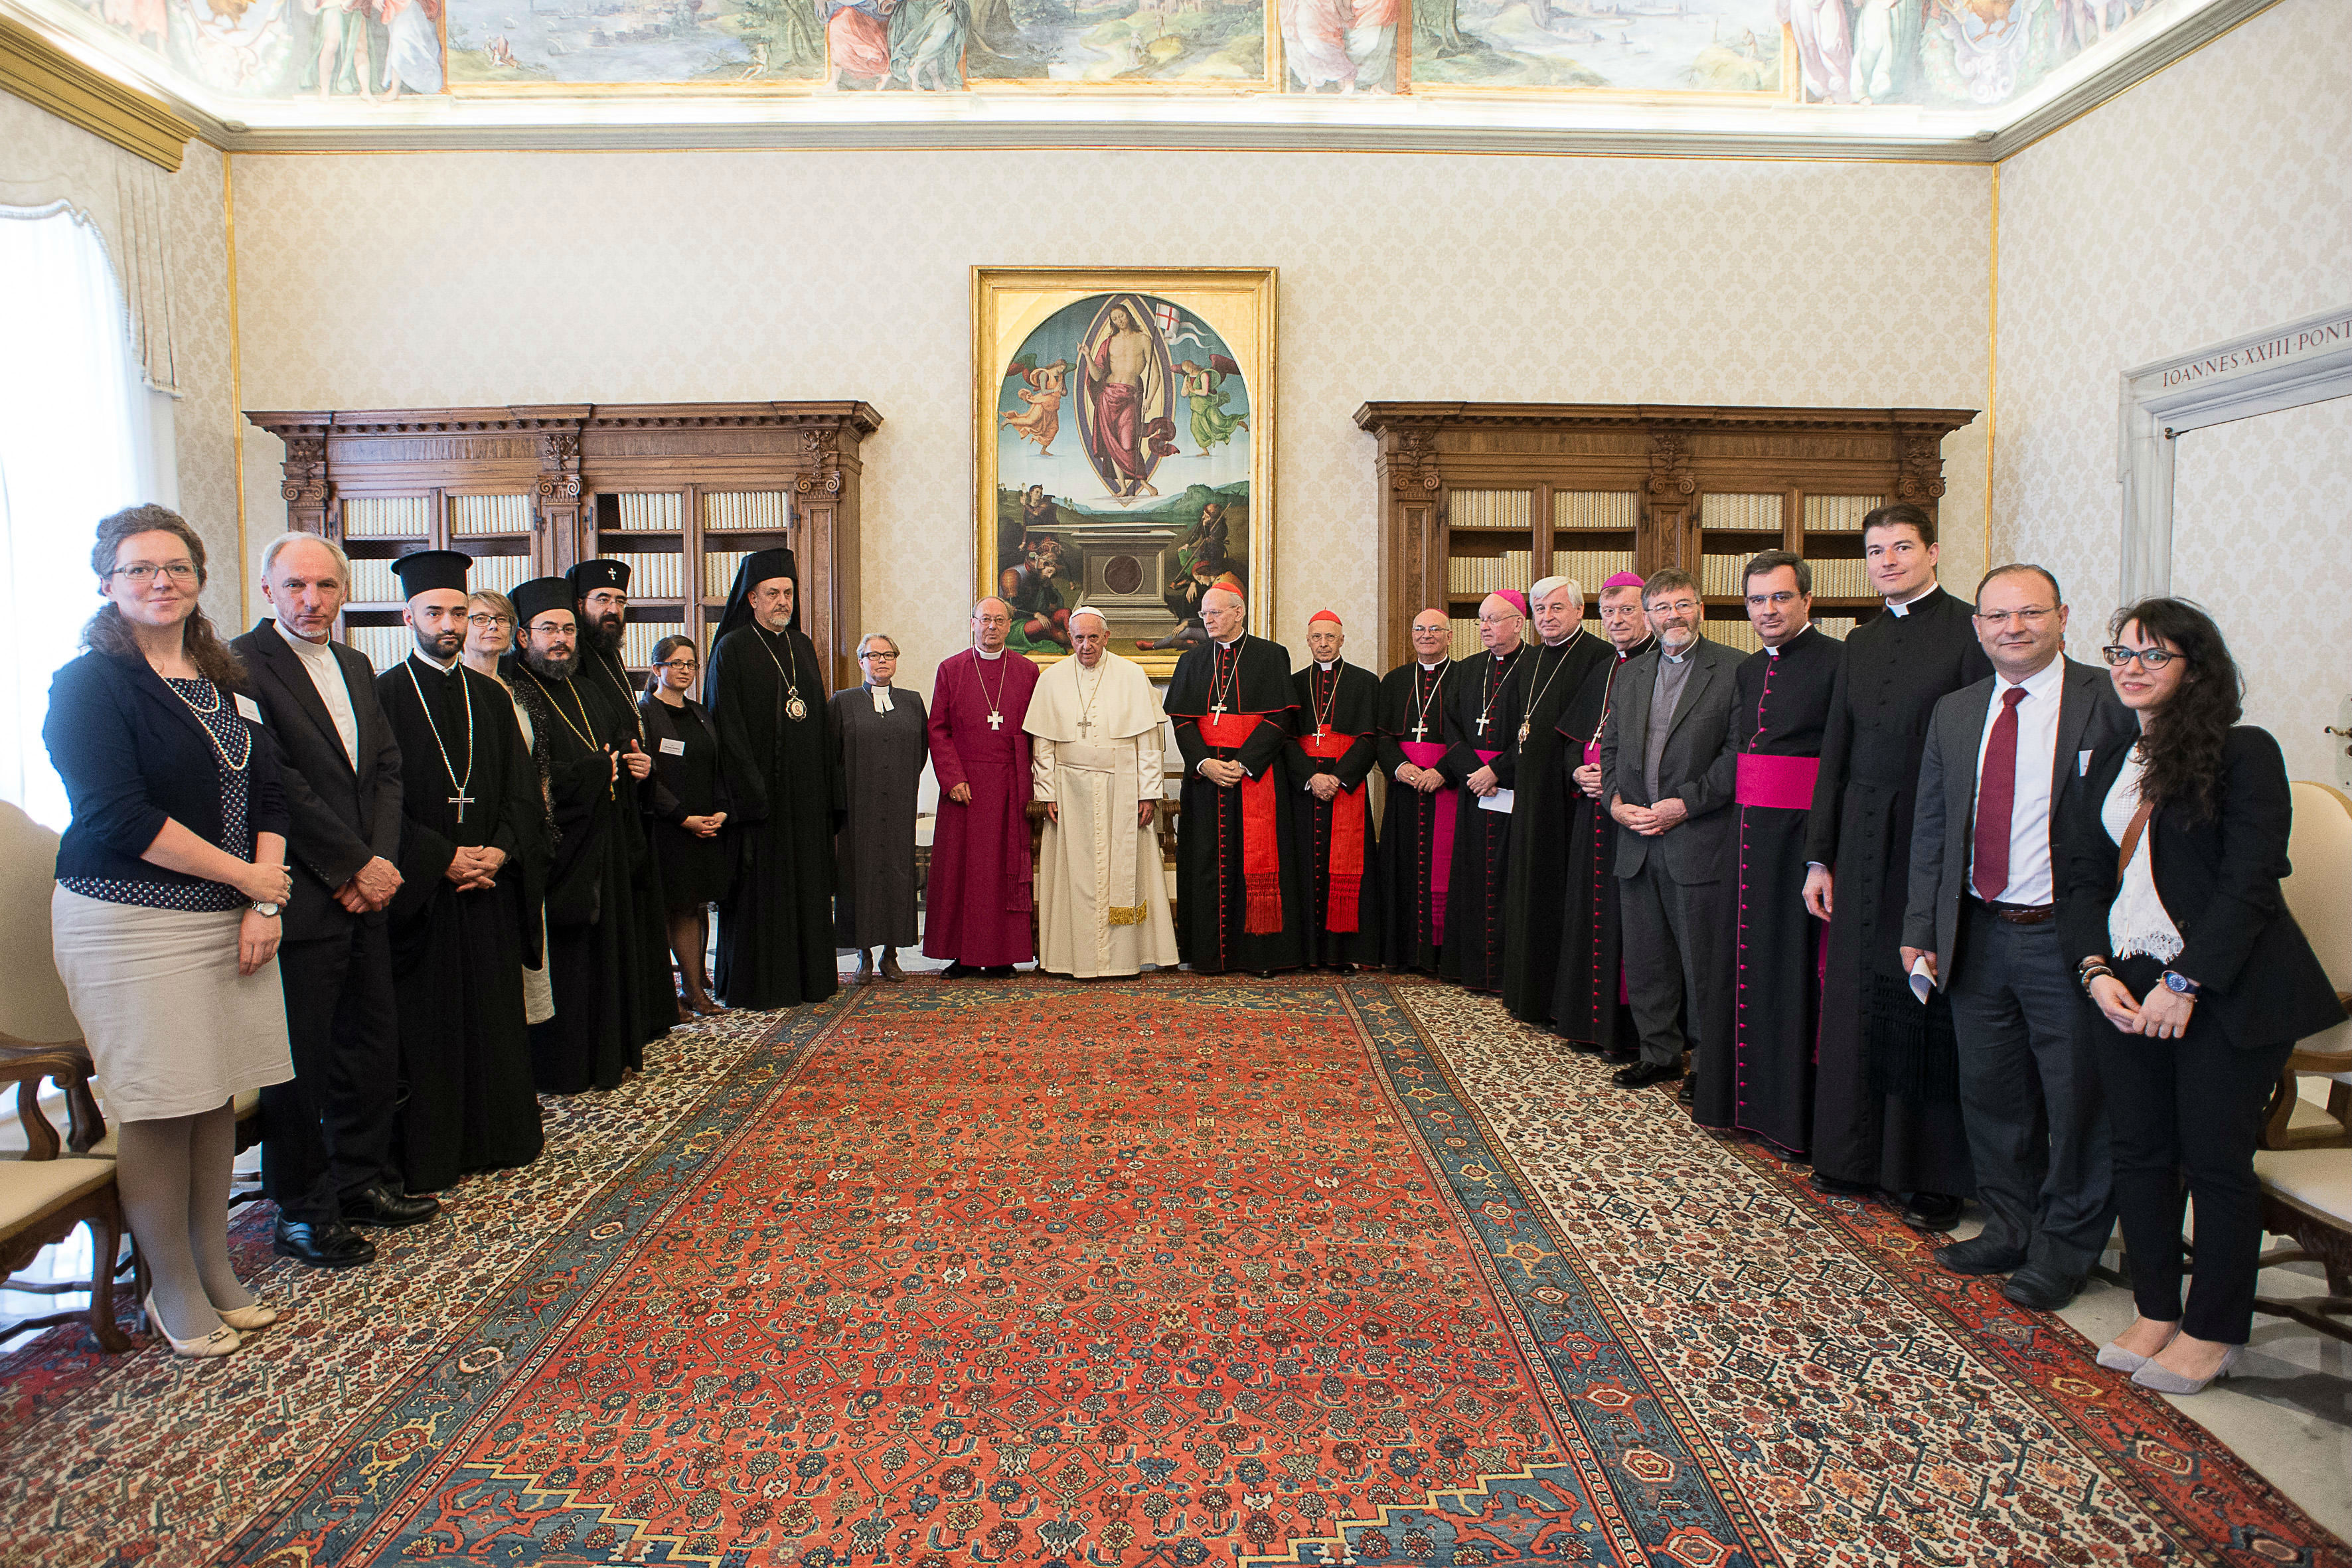 Pope Francis with the members of the Joint Committee of the Conference of European Churches (CEC) and the Council of European Bishops’ Conferences (CCEE)